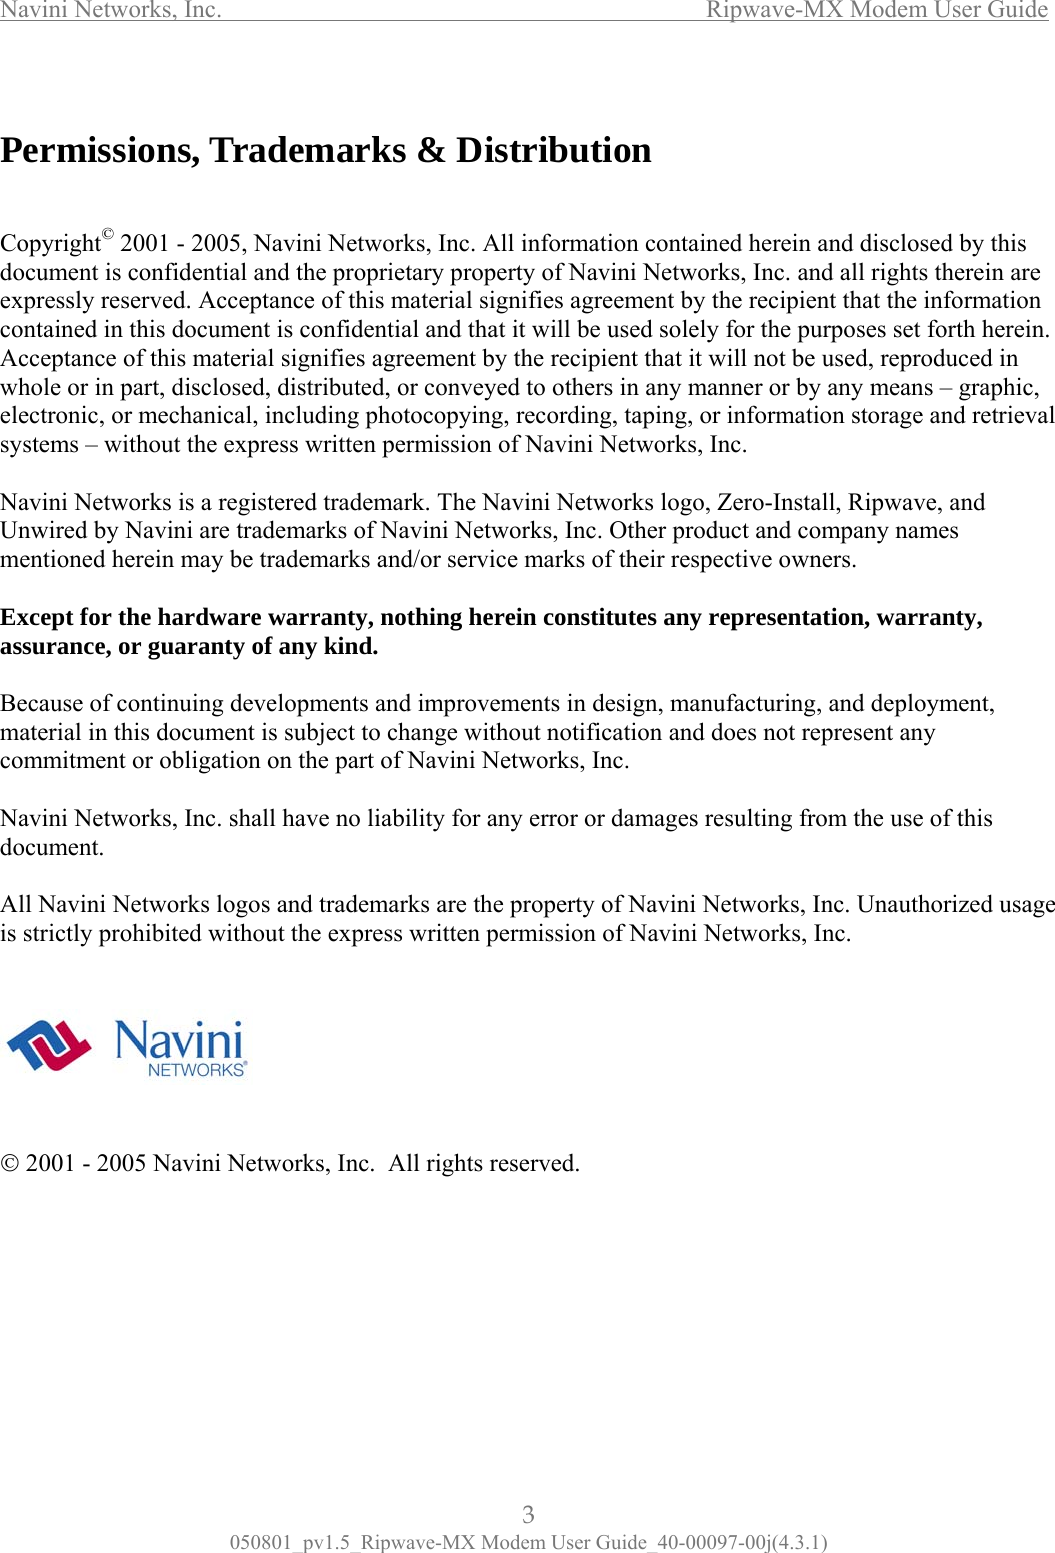 Navini Networks, Inc.                  Ripwave-MX Modem User Guide  Permissions, Trademarks &amp; Distribution  NaUnco        Copyright© 2001 - 2005, Navini Networks, Inc. All information contained herein and disclosed by this document is confidential and the proprietary property of Navini Networks, Inc. and all rights therein are expressly reserved. Acceptance of this material signifies agreement by the recipient that the information contained in this document is confidential and that it will be used solely for the purposes set forth herein. Acceptance of this material signifies agreement by the recipient that it will not be used, reproduced in whole or in part, disclosed, distributed, or conveyed to others in any manner or by any means – graphic, electronic, or mechanical, including photocopying, recording, taping, or information storage and retrieval systems – without the express written permission of Navini Networks, Inc.  vini Networks is a registered trademark. The Navini Networks logo, Zero-Install, Ripwave, and wired by Navini are trademarks of Navini Networks, Inc. Other product and company names mentioned herein may be trademarks and/or service marks of their respective owners.  Except for the hardware warranty, nothing herein constitutes any representation, warranty, assurance, or guaranty of any kind.  Because of continuing developments and improvements in design, manufacturing, and deployment, material in this document is subject to change without notification and does not represent any mmitment or obligation on the part of Navini Networks, Inc.  Navini Networks, Inc. shall have no liability for any error or damages resulting from the use of this document.  All Navini Networks logos and trademarks are the property of Navini Networks, Inc. Unauthorized usage is strictly prohibited without the express written permission of Navini Networks, Inc. © 2001 - 2005 Navini Networks, Inc.  All rights reserved.       3 050801_pv1.5_Ripwave-MX Modem User Guide_40-00097-00j(4.3.1) 